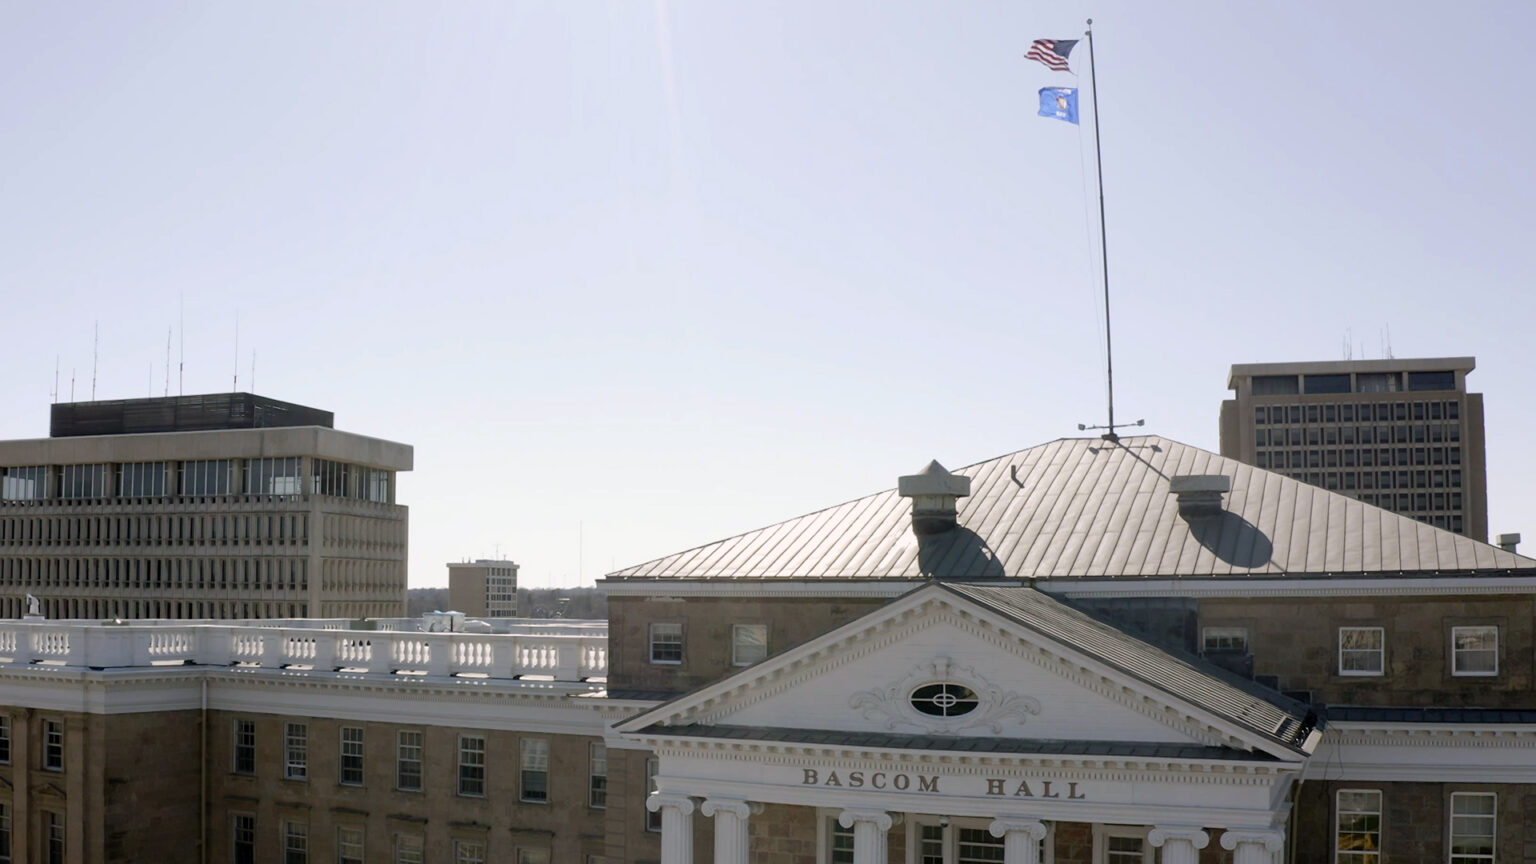 The U.S. and Wisconsin flags fly at the top of a flagpole affixed to the sloped roof of a multi-story stone masonry building with a pediment atop its front entrance with a sign reading Bascom Hall, with multiple other modernist concrete and glass buildings visible in the background under a clear sky.